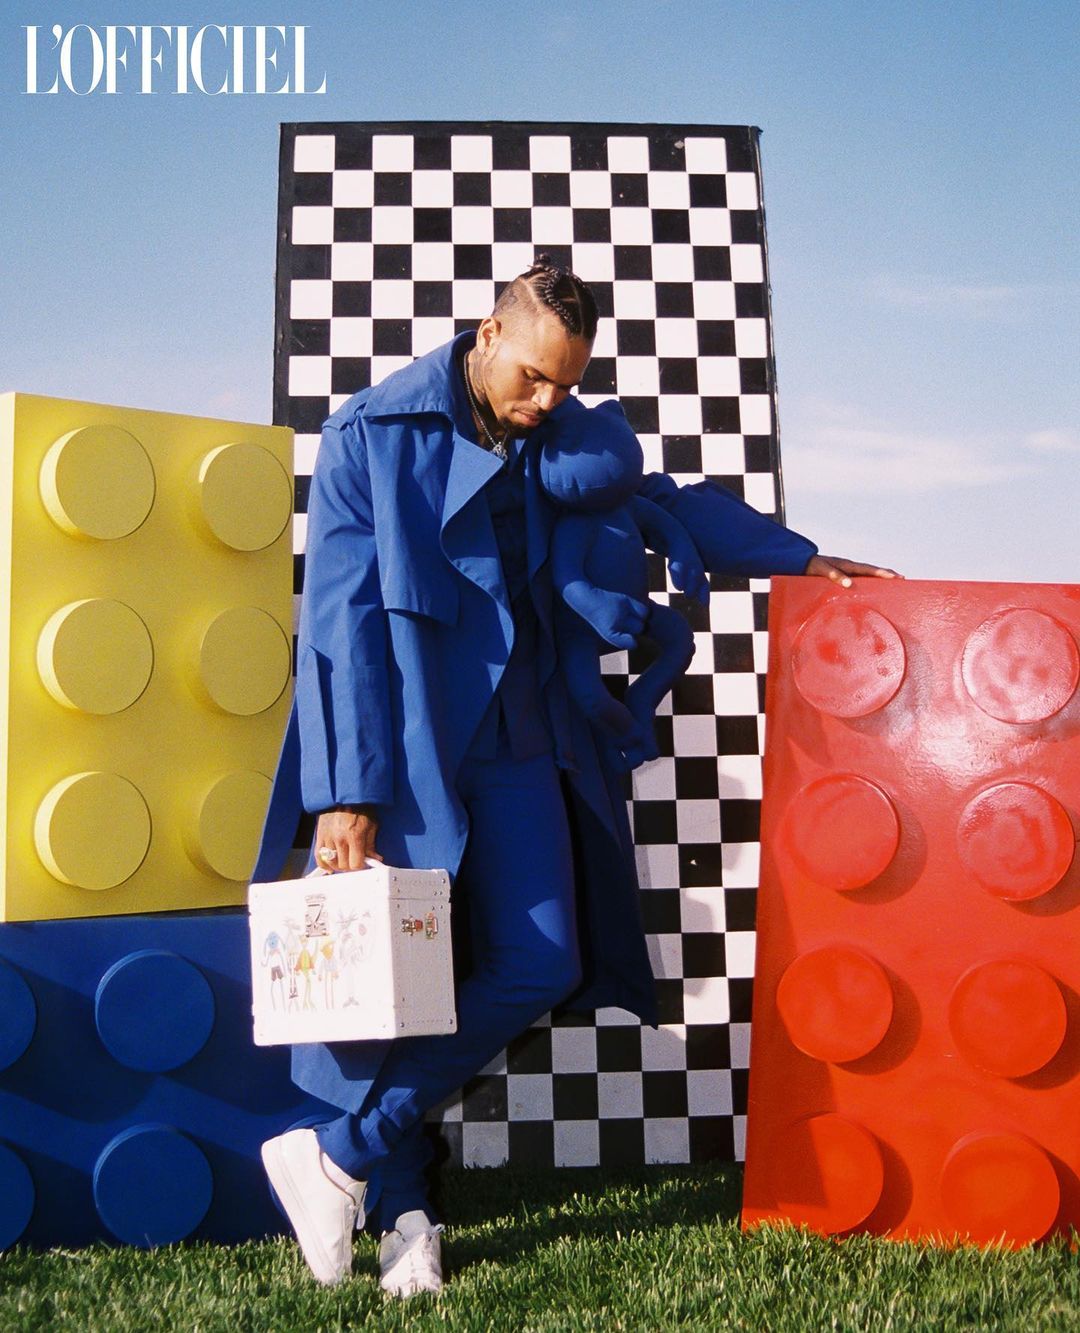 SPOTTED: Chris Brown in Louis Vuitton Menswear for L'Officiel